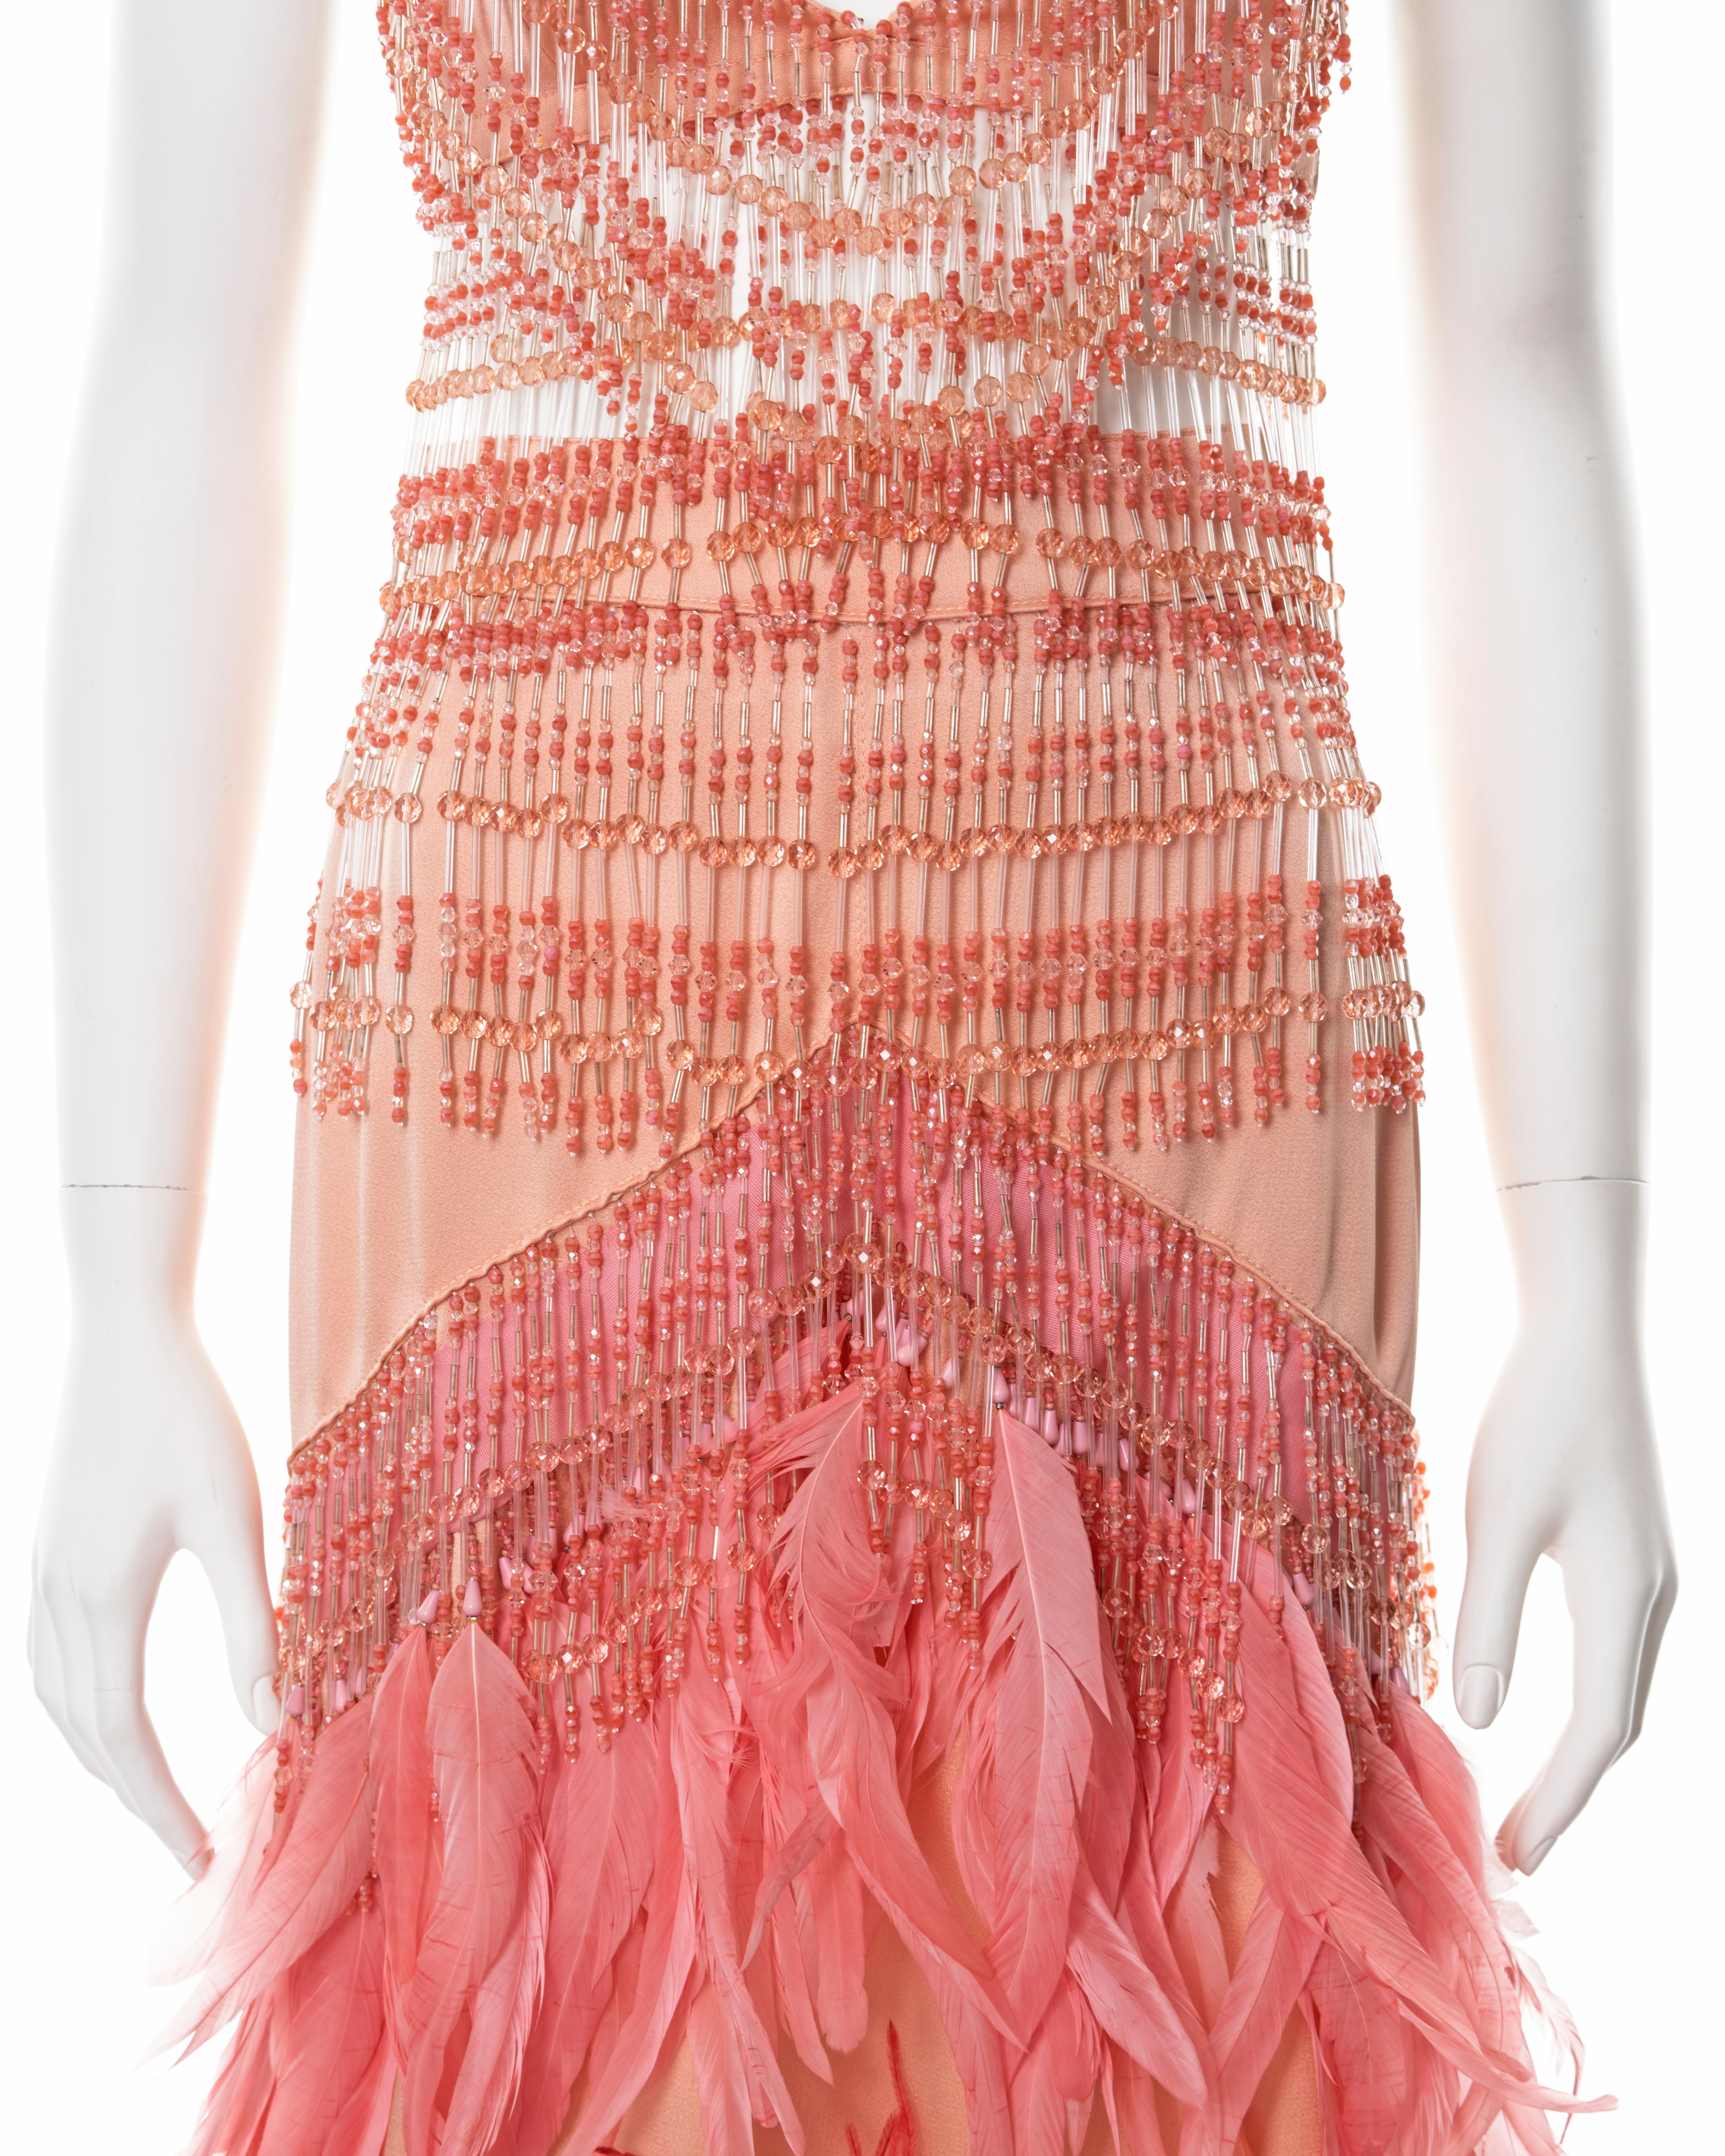 Prada pink silk feather embellished bra and skirt with beaded fringe, fw 2017 In Excellent Condition For Sale In London, GB